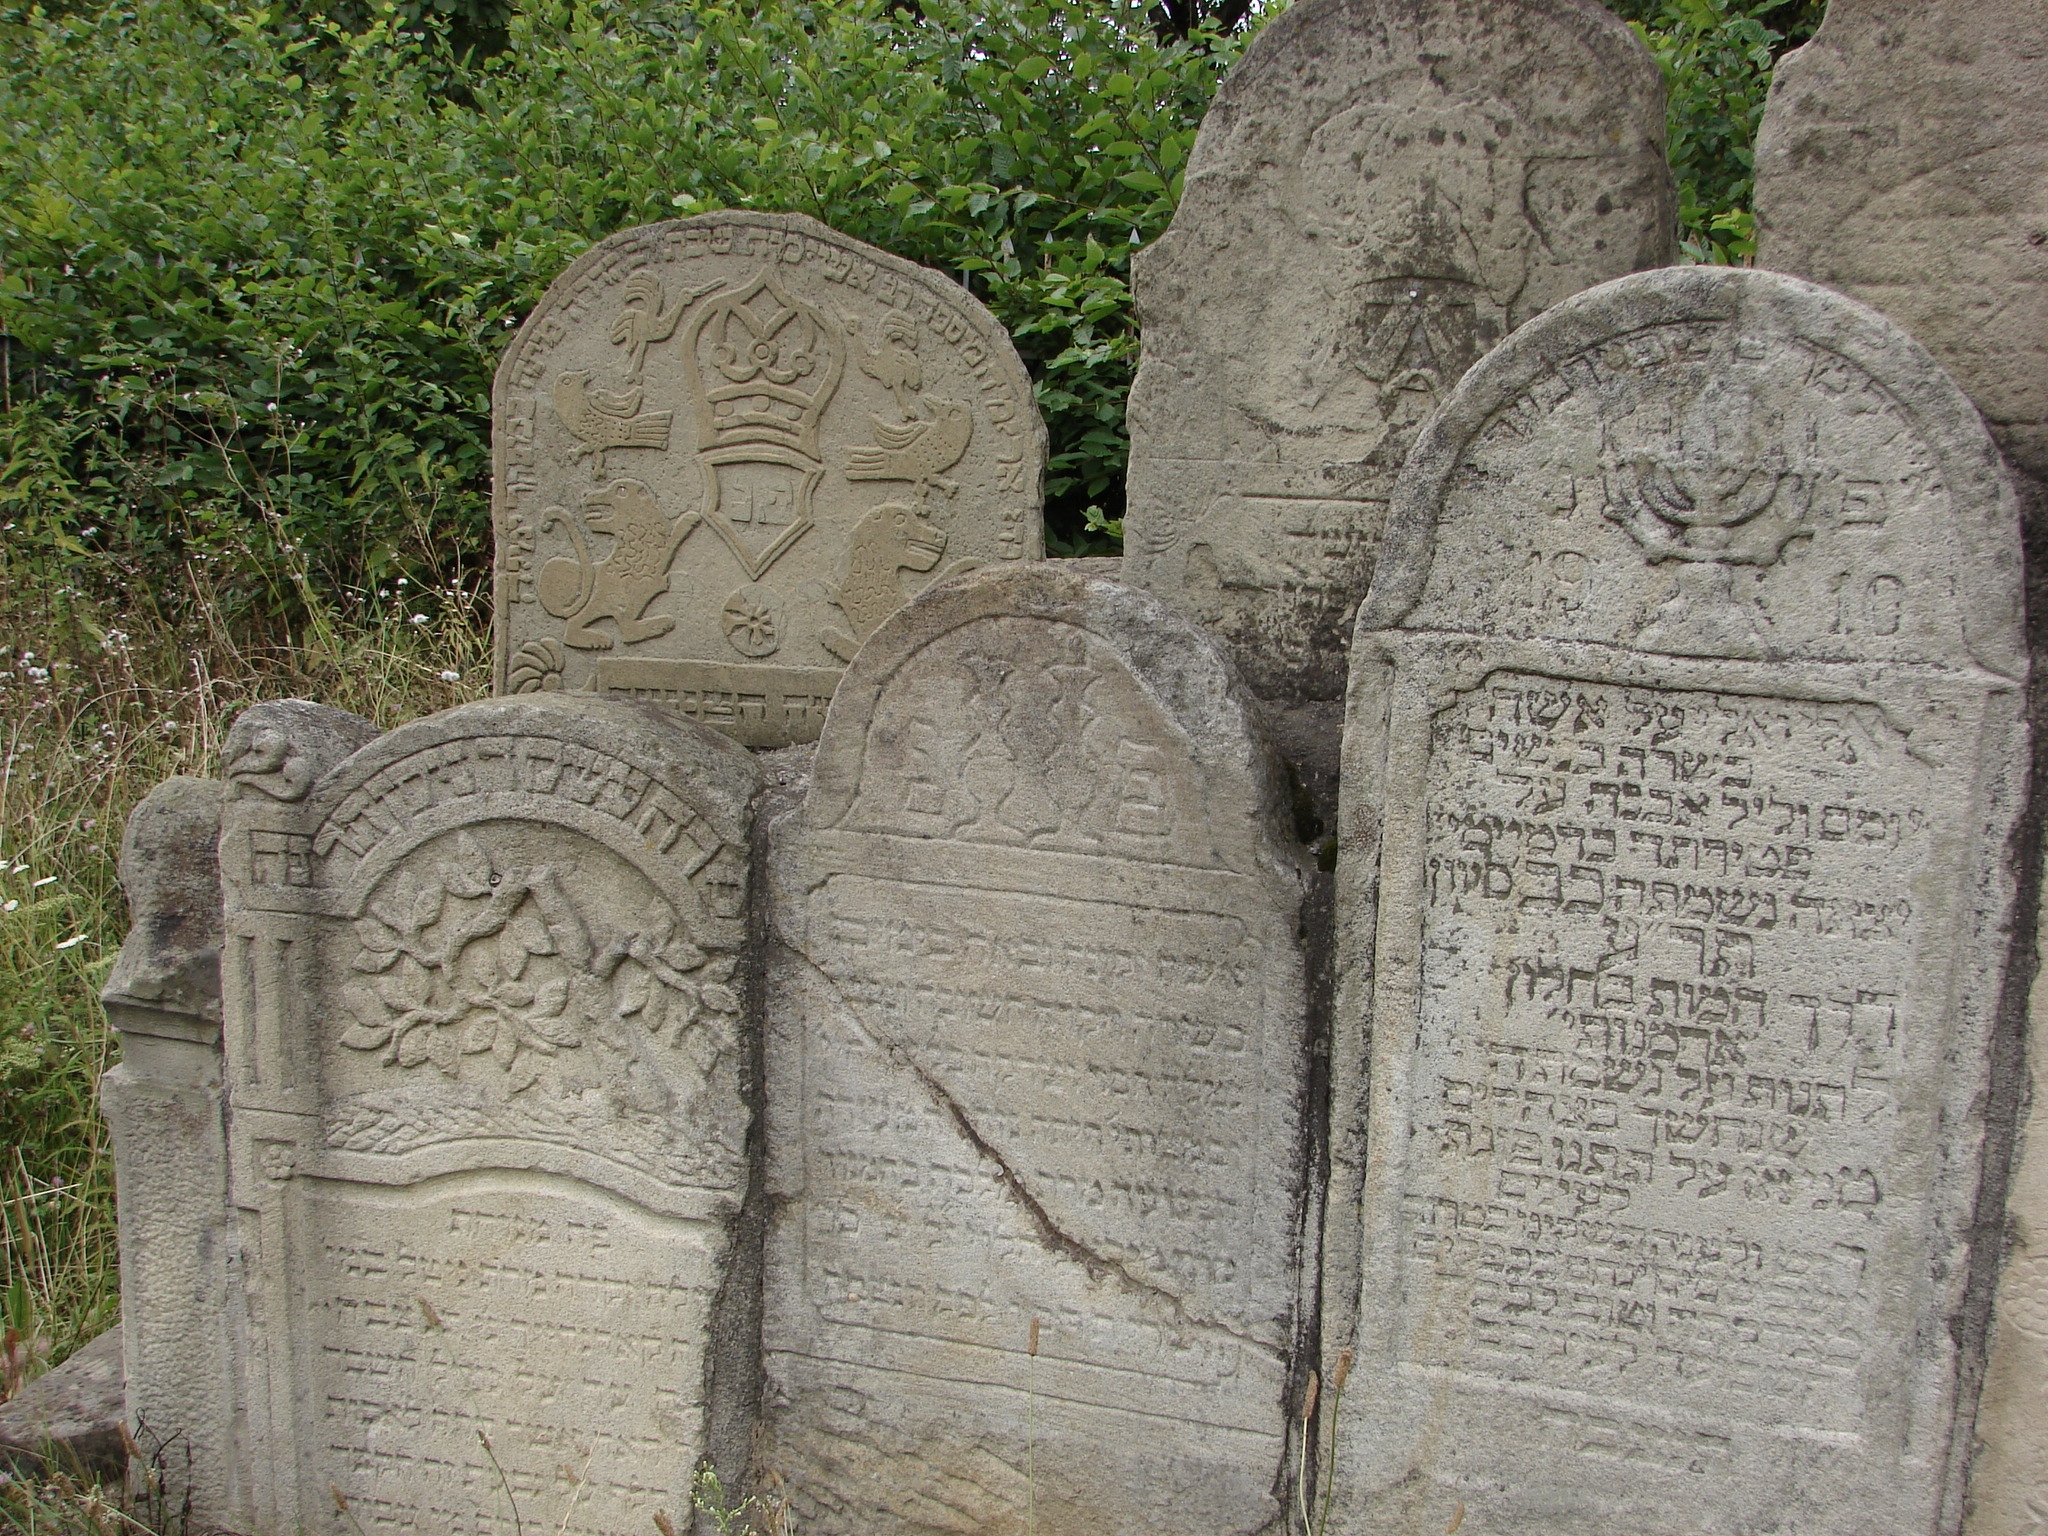 Close-up of Some of the Grouped Stones